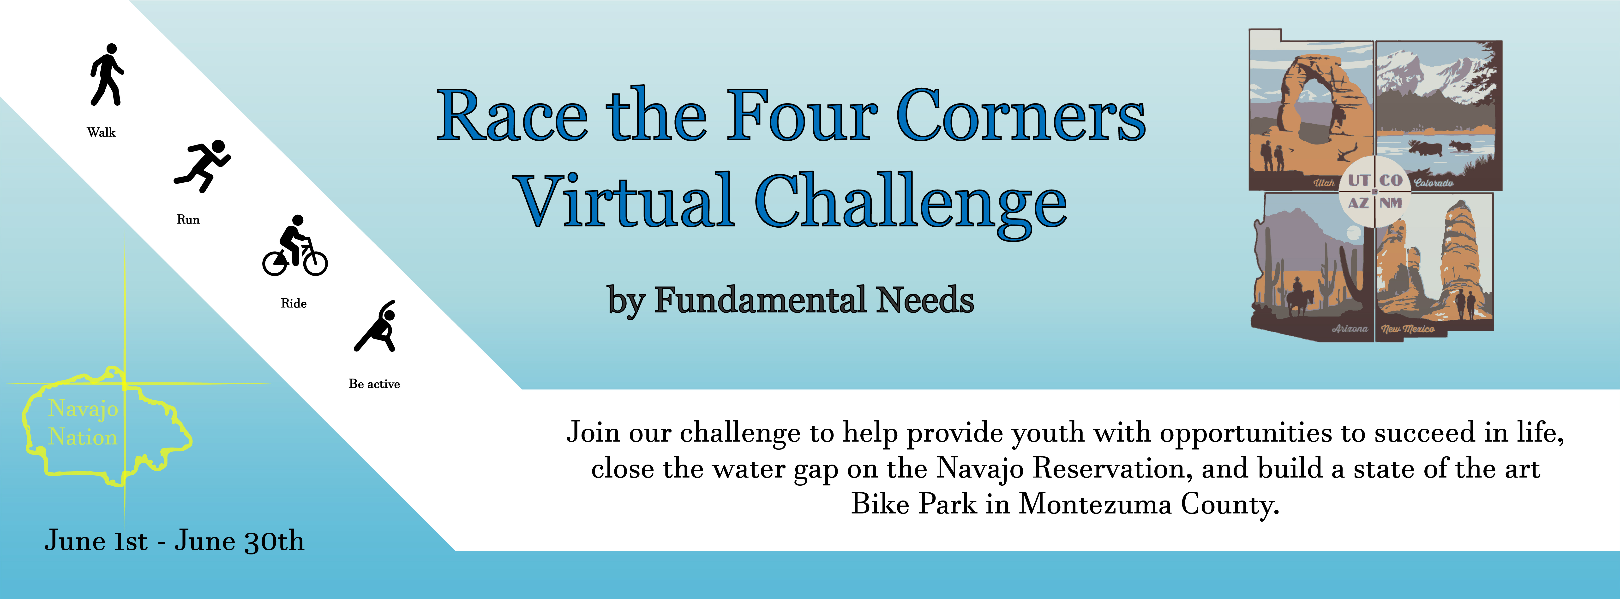 Race the Four Corners Virtual Challenge by Fundamental Needs